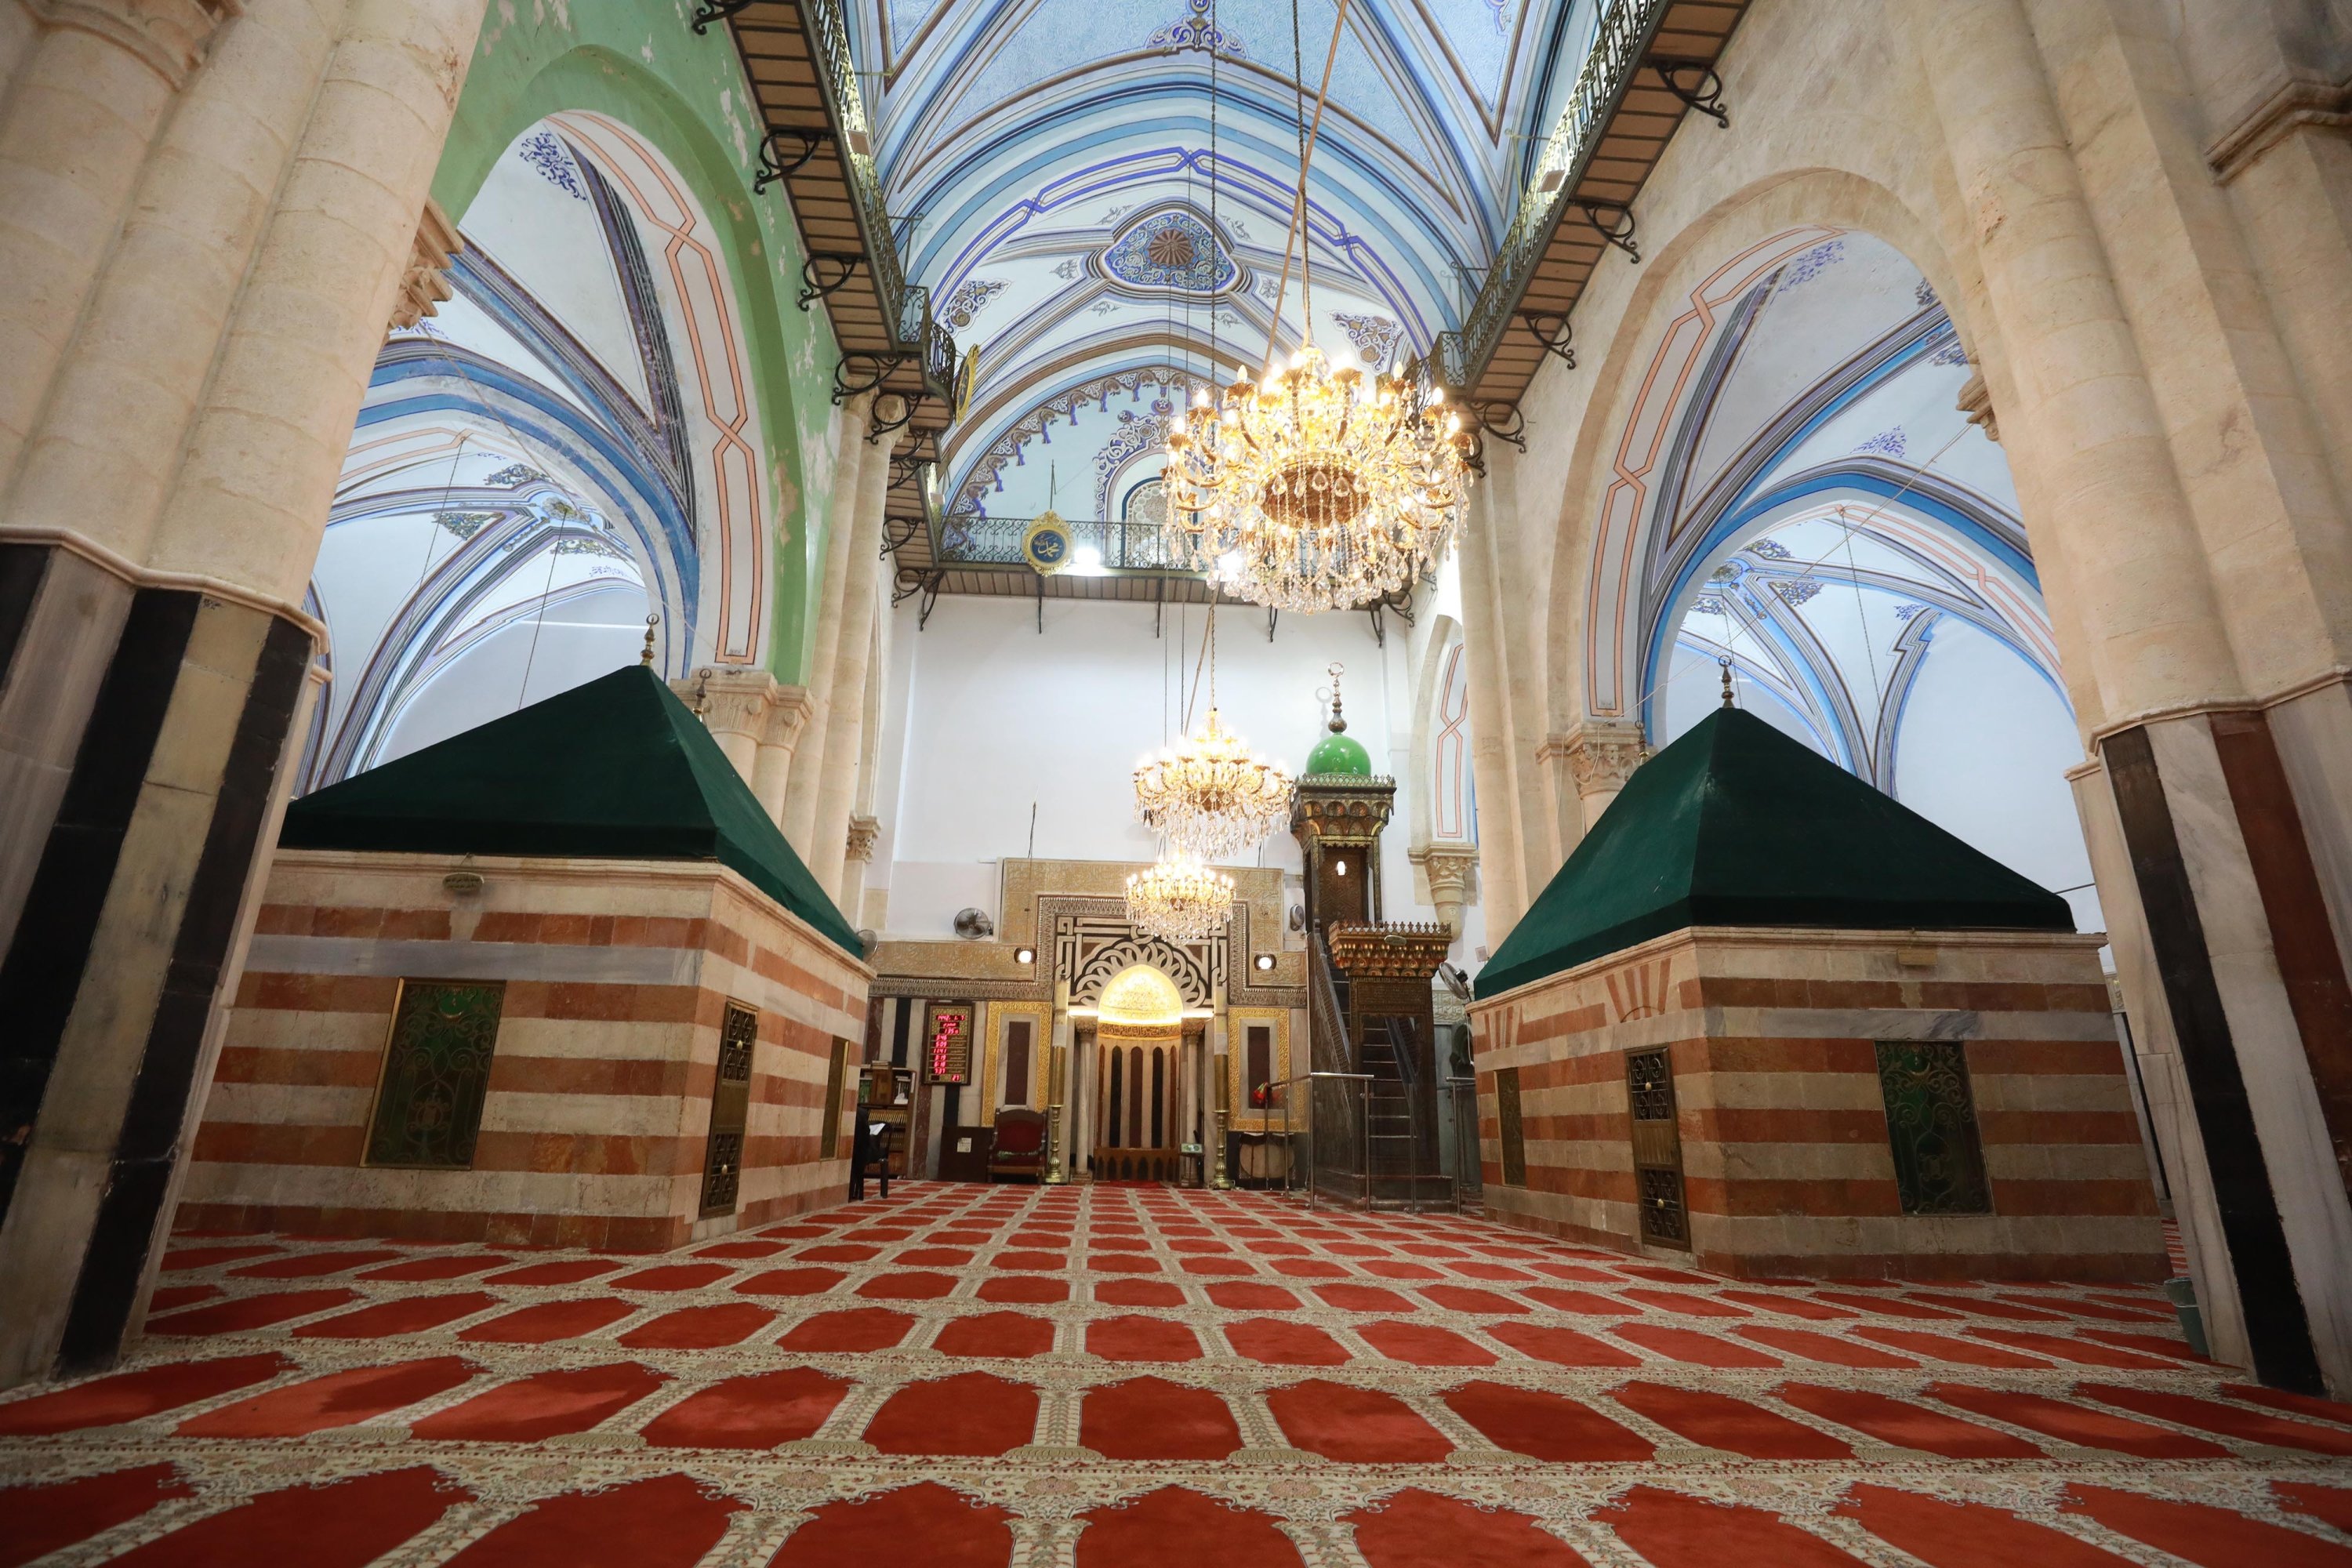 Ottoman motifs adorn Ibrahimi Mosque for hundreds of years | Daily Sabah